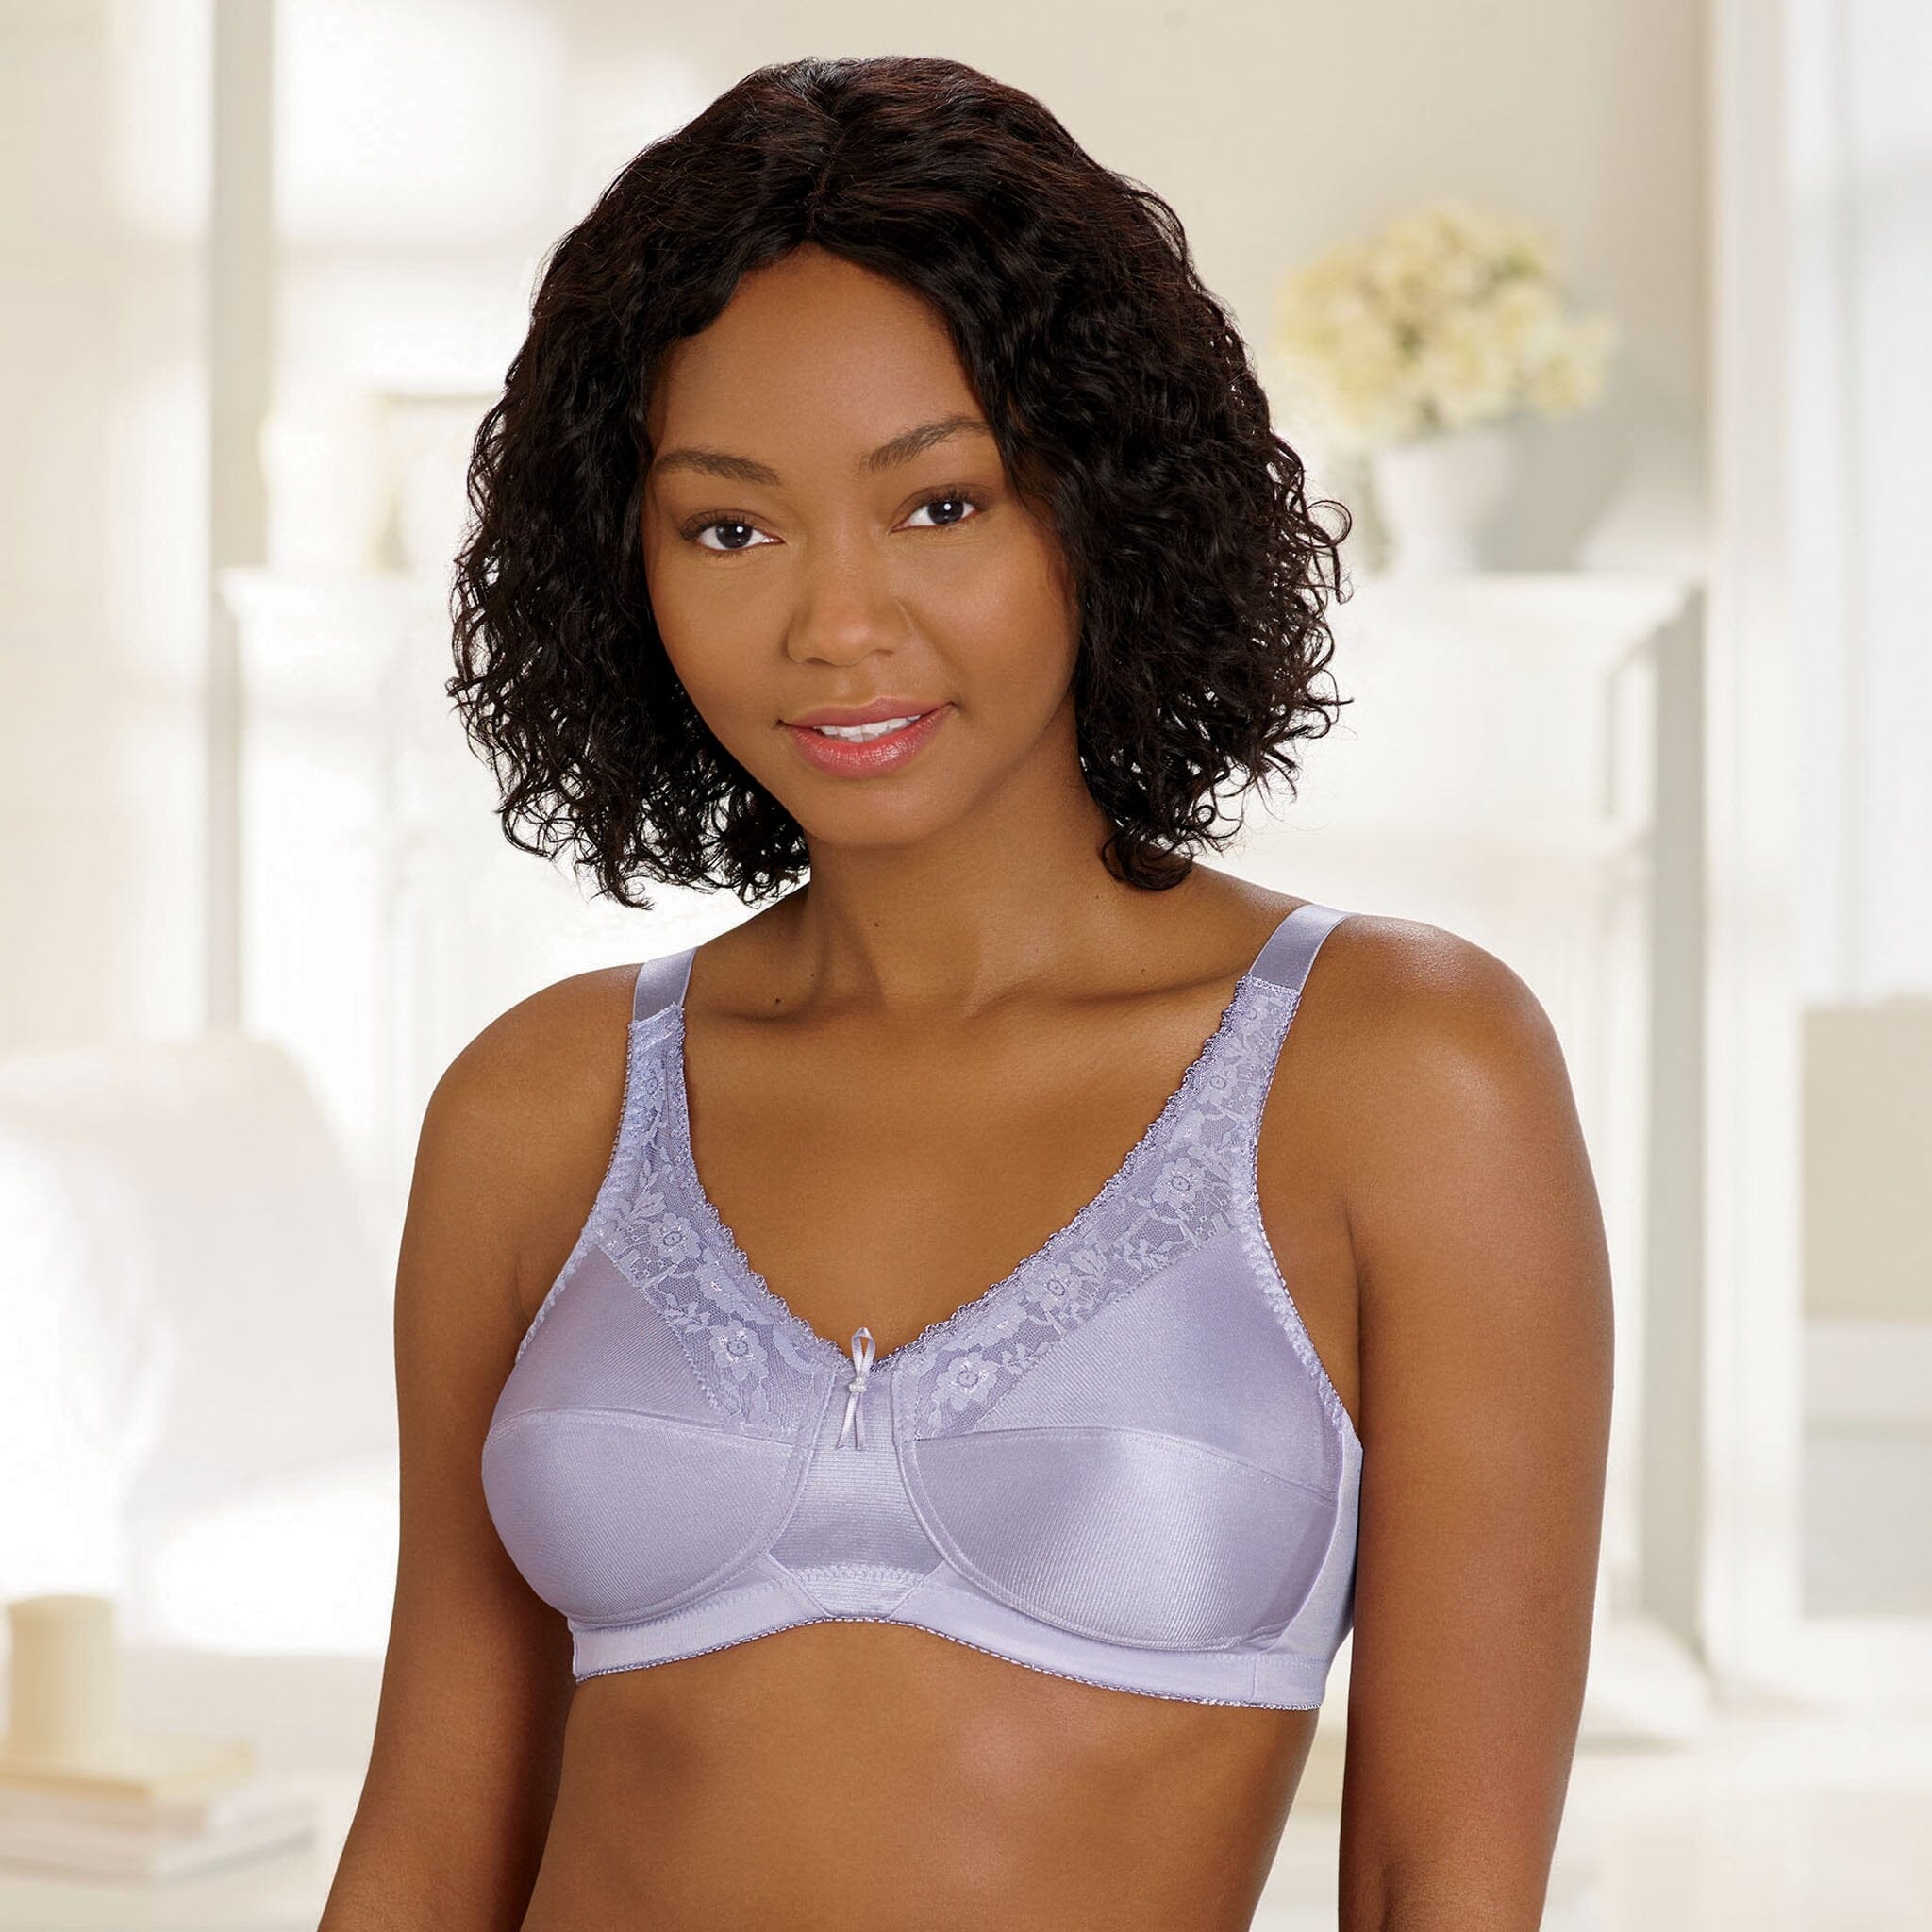 Can I Wear an Underwire Bra through Airport Security?